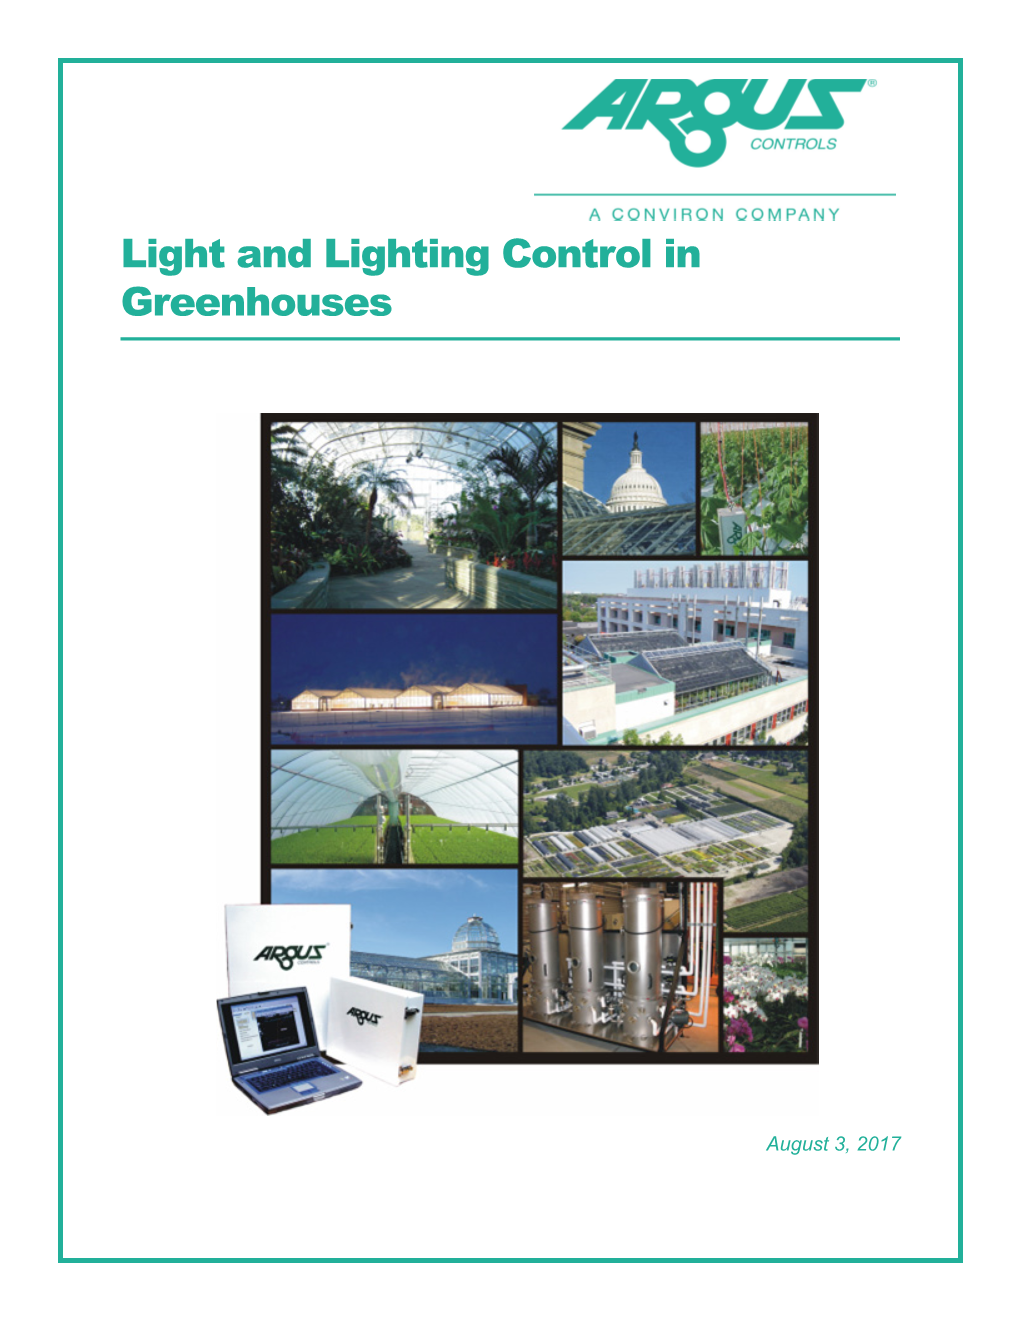 Light and Lighting Control in Greenhouses